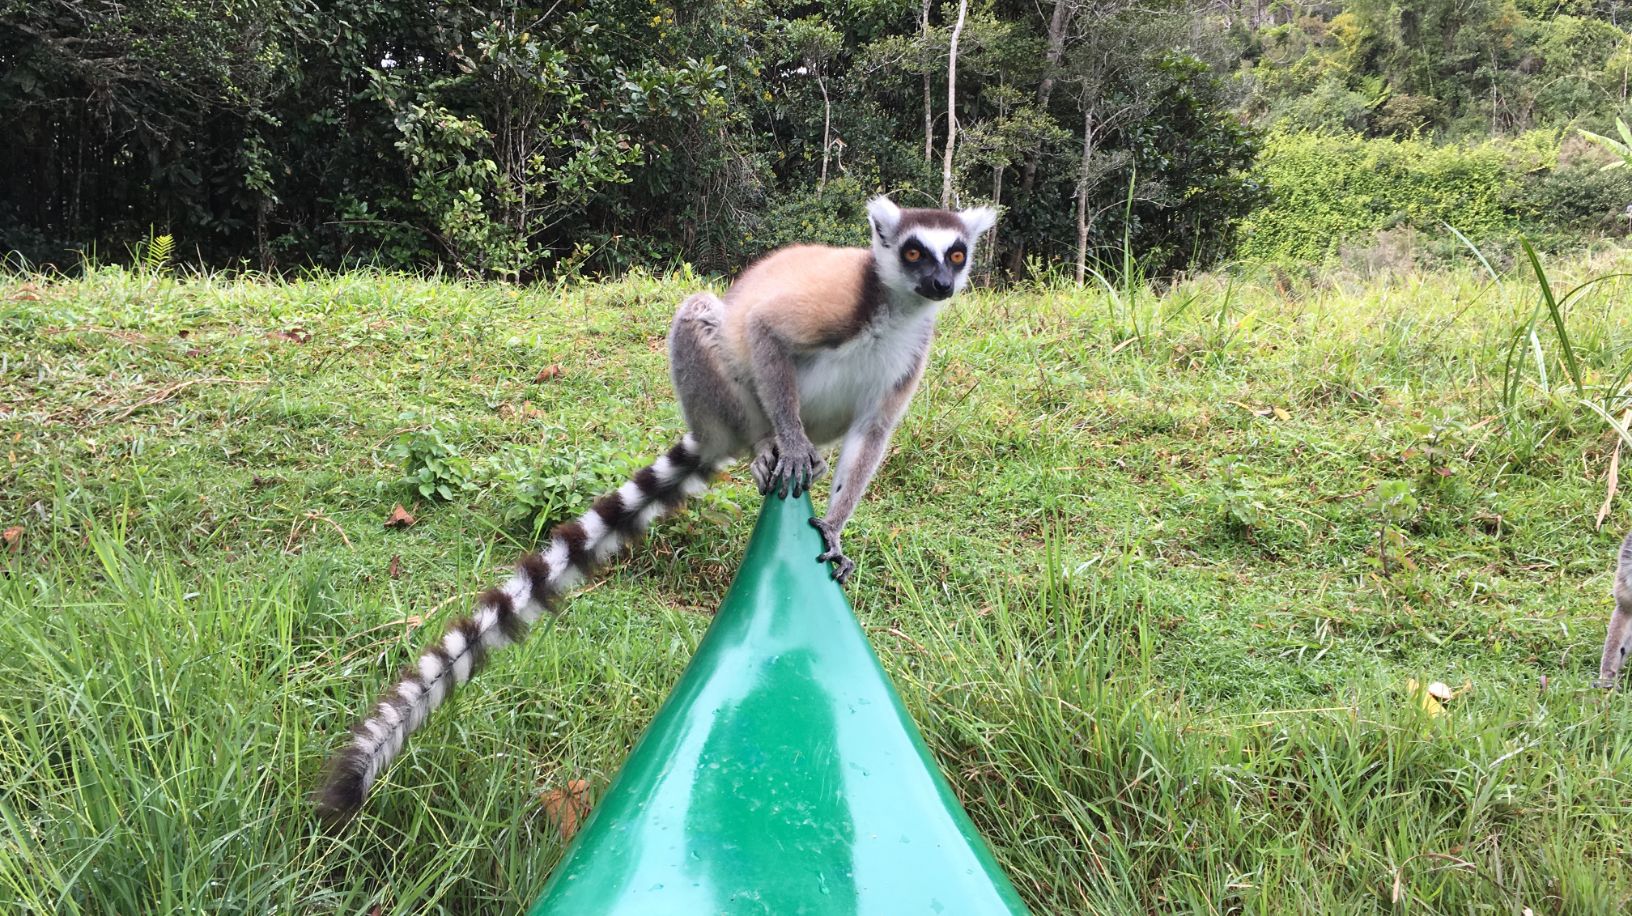 This cute little ringtail lemur jumped on our kayak.